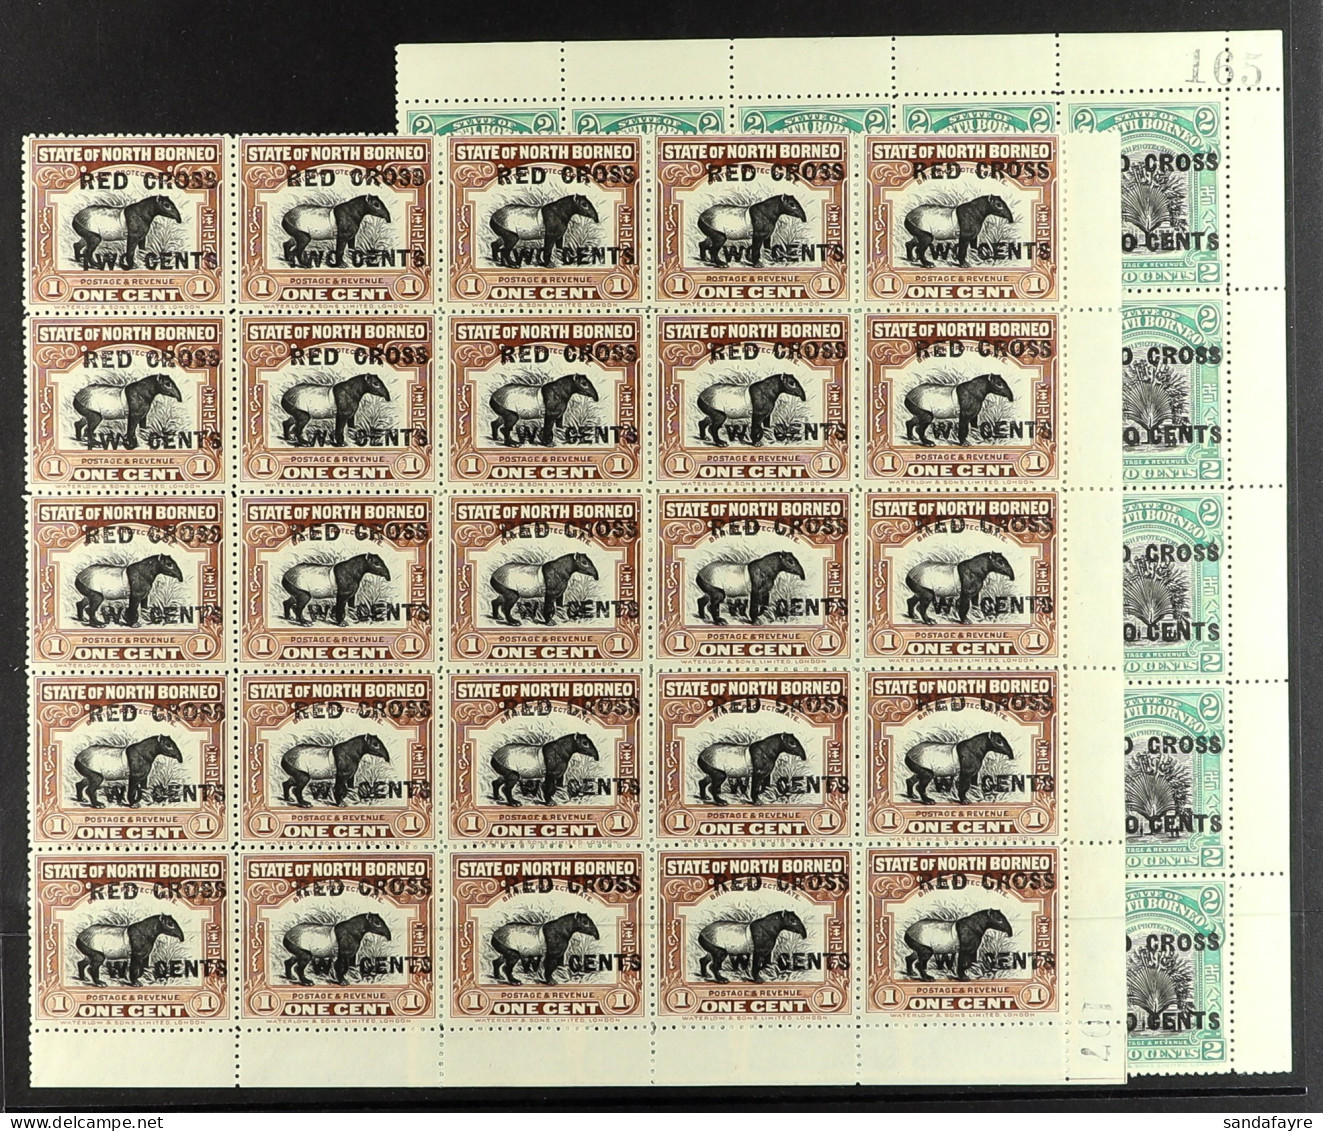 1918 (Aug) 'RED CROSS / TWO CENTS' Surcharges On 1c, 2c, 3c, 4c, 5c, 6c, 8c And 10c (SG 214-223), Each A Block Of 25 Fro - Nordborneo (...-1963)